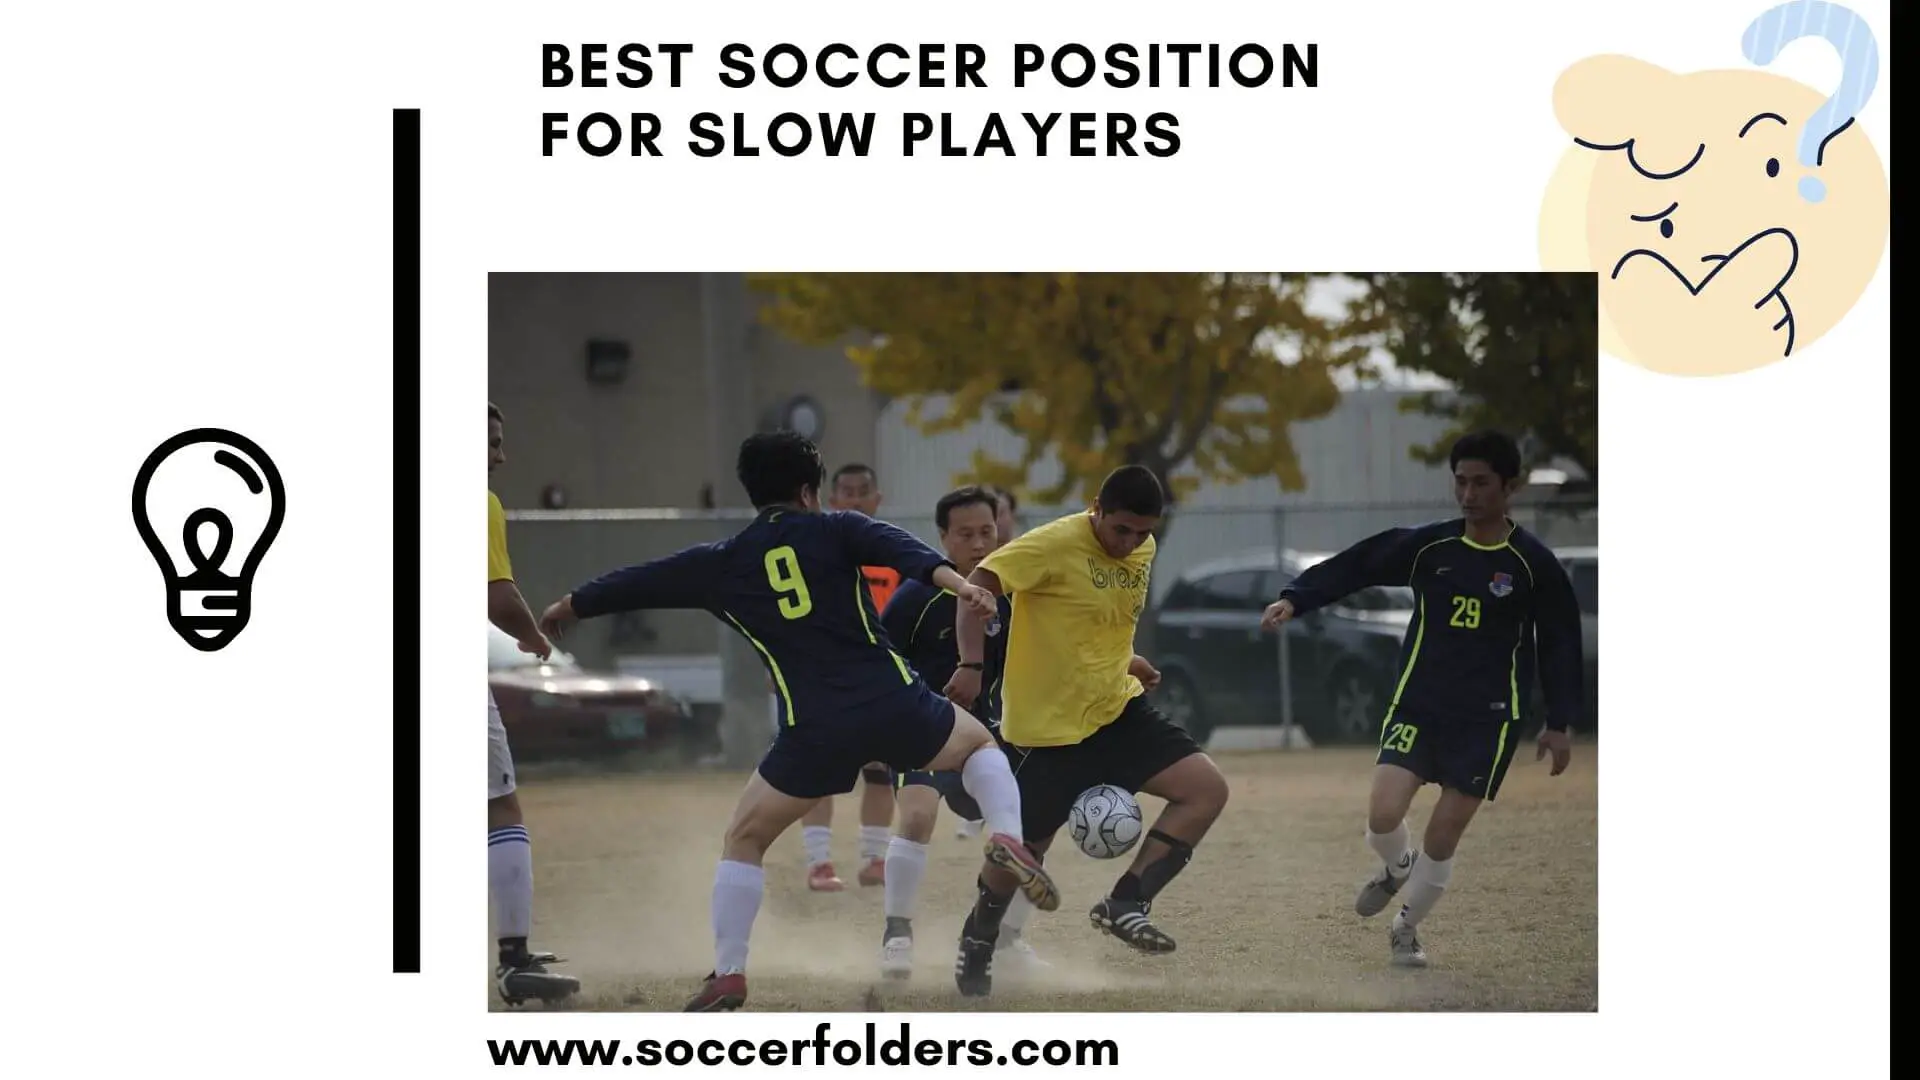 Best soccer position for slow players - Featured image